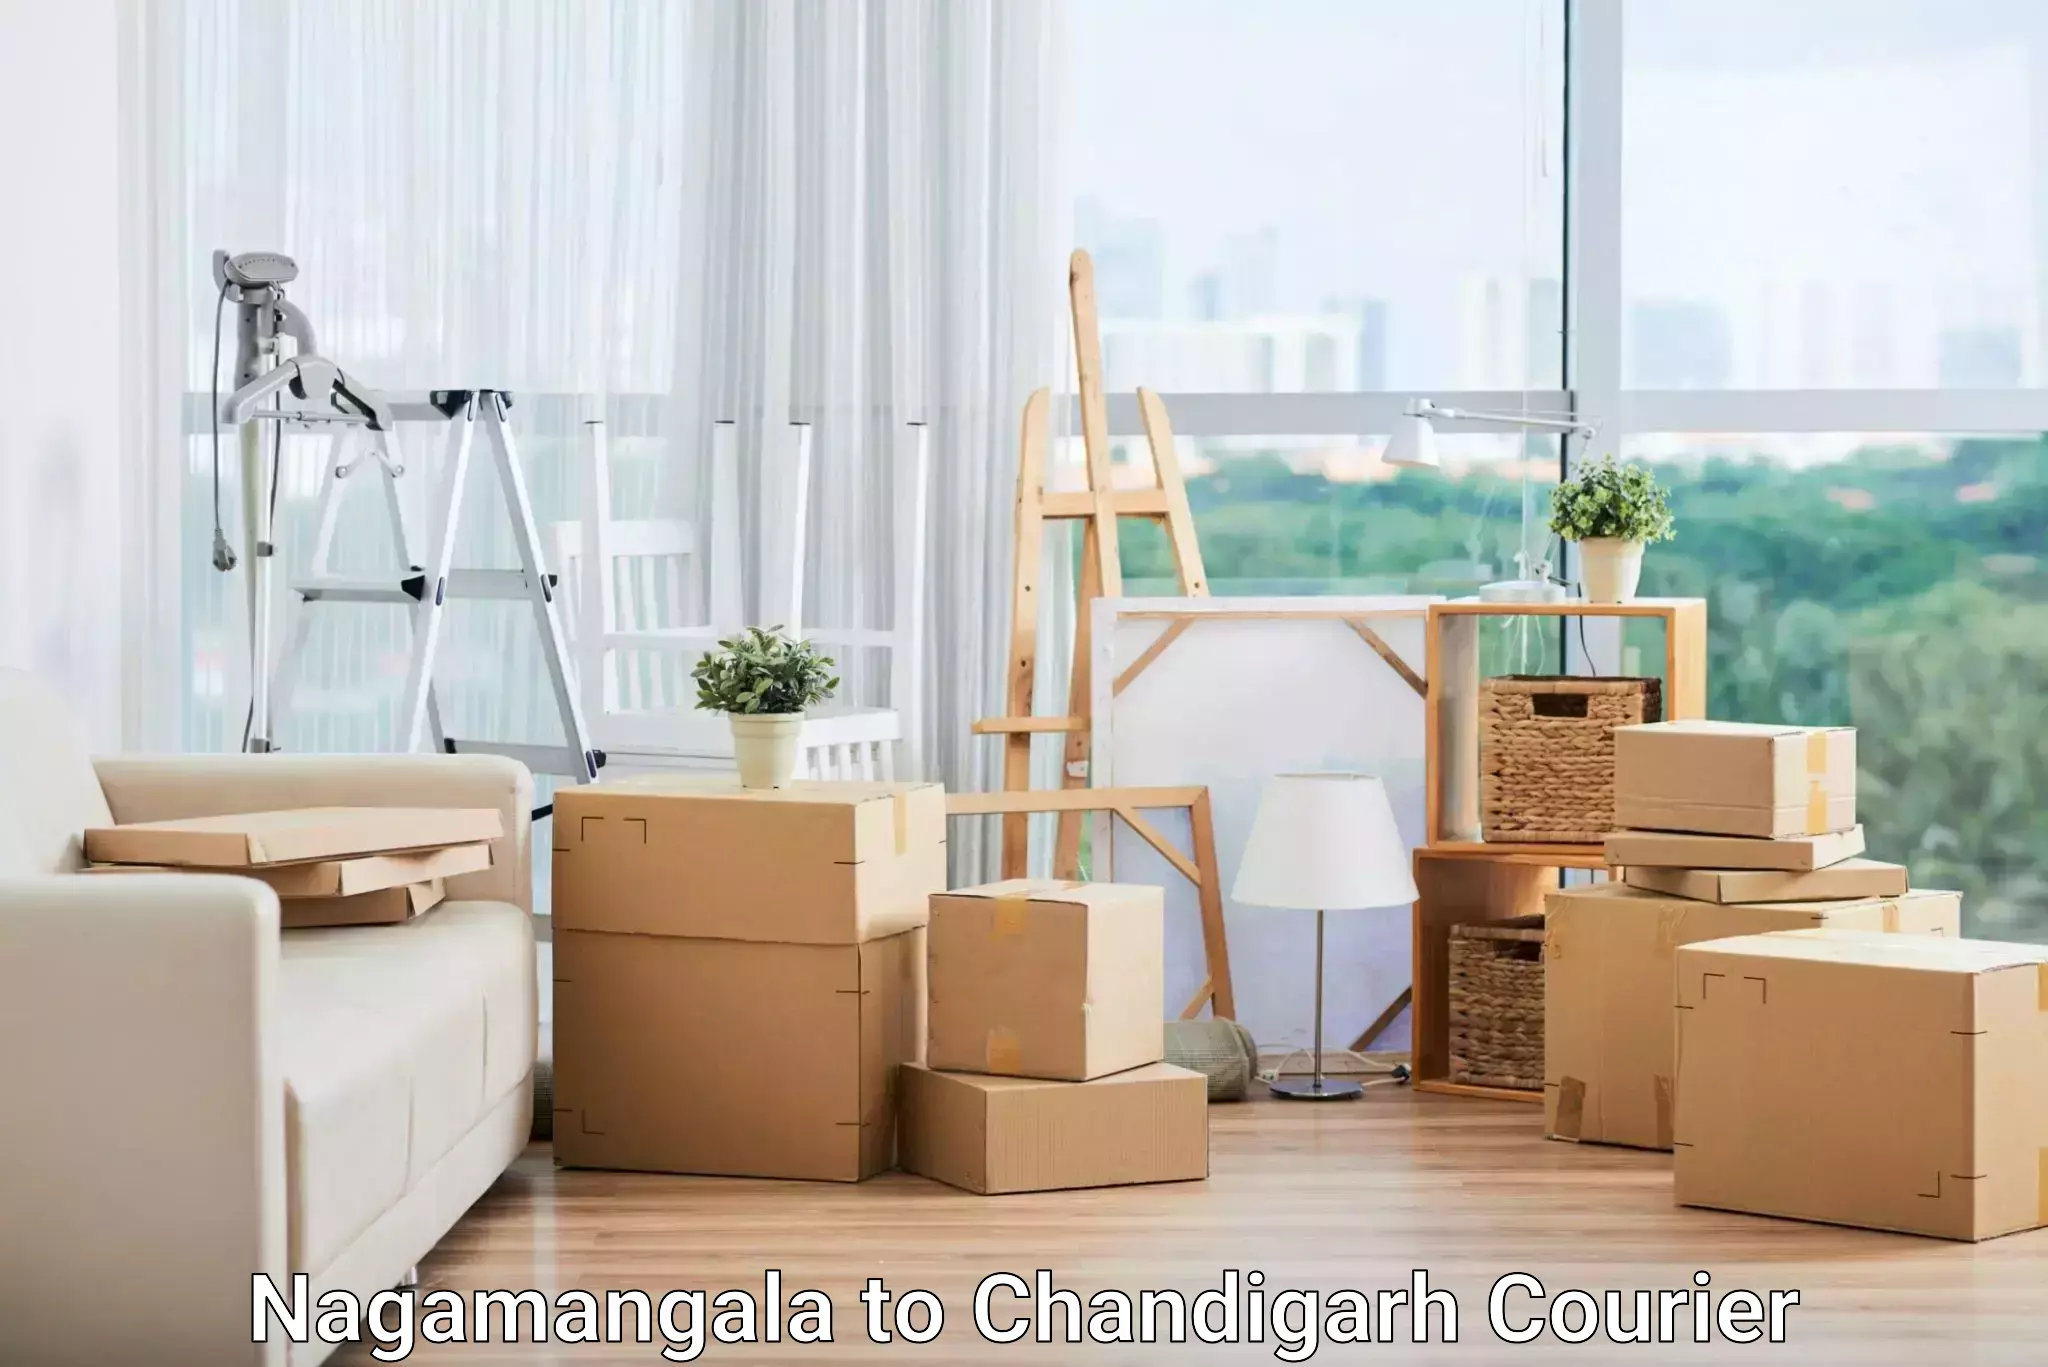 State-of-the-art courier technology Nagamangala to Chandigarh